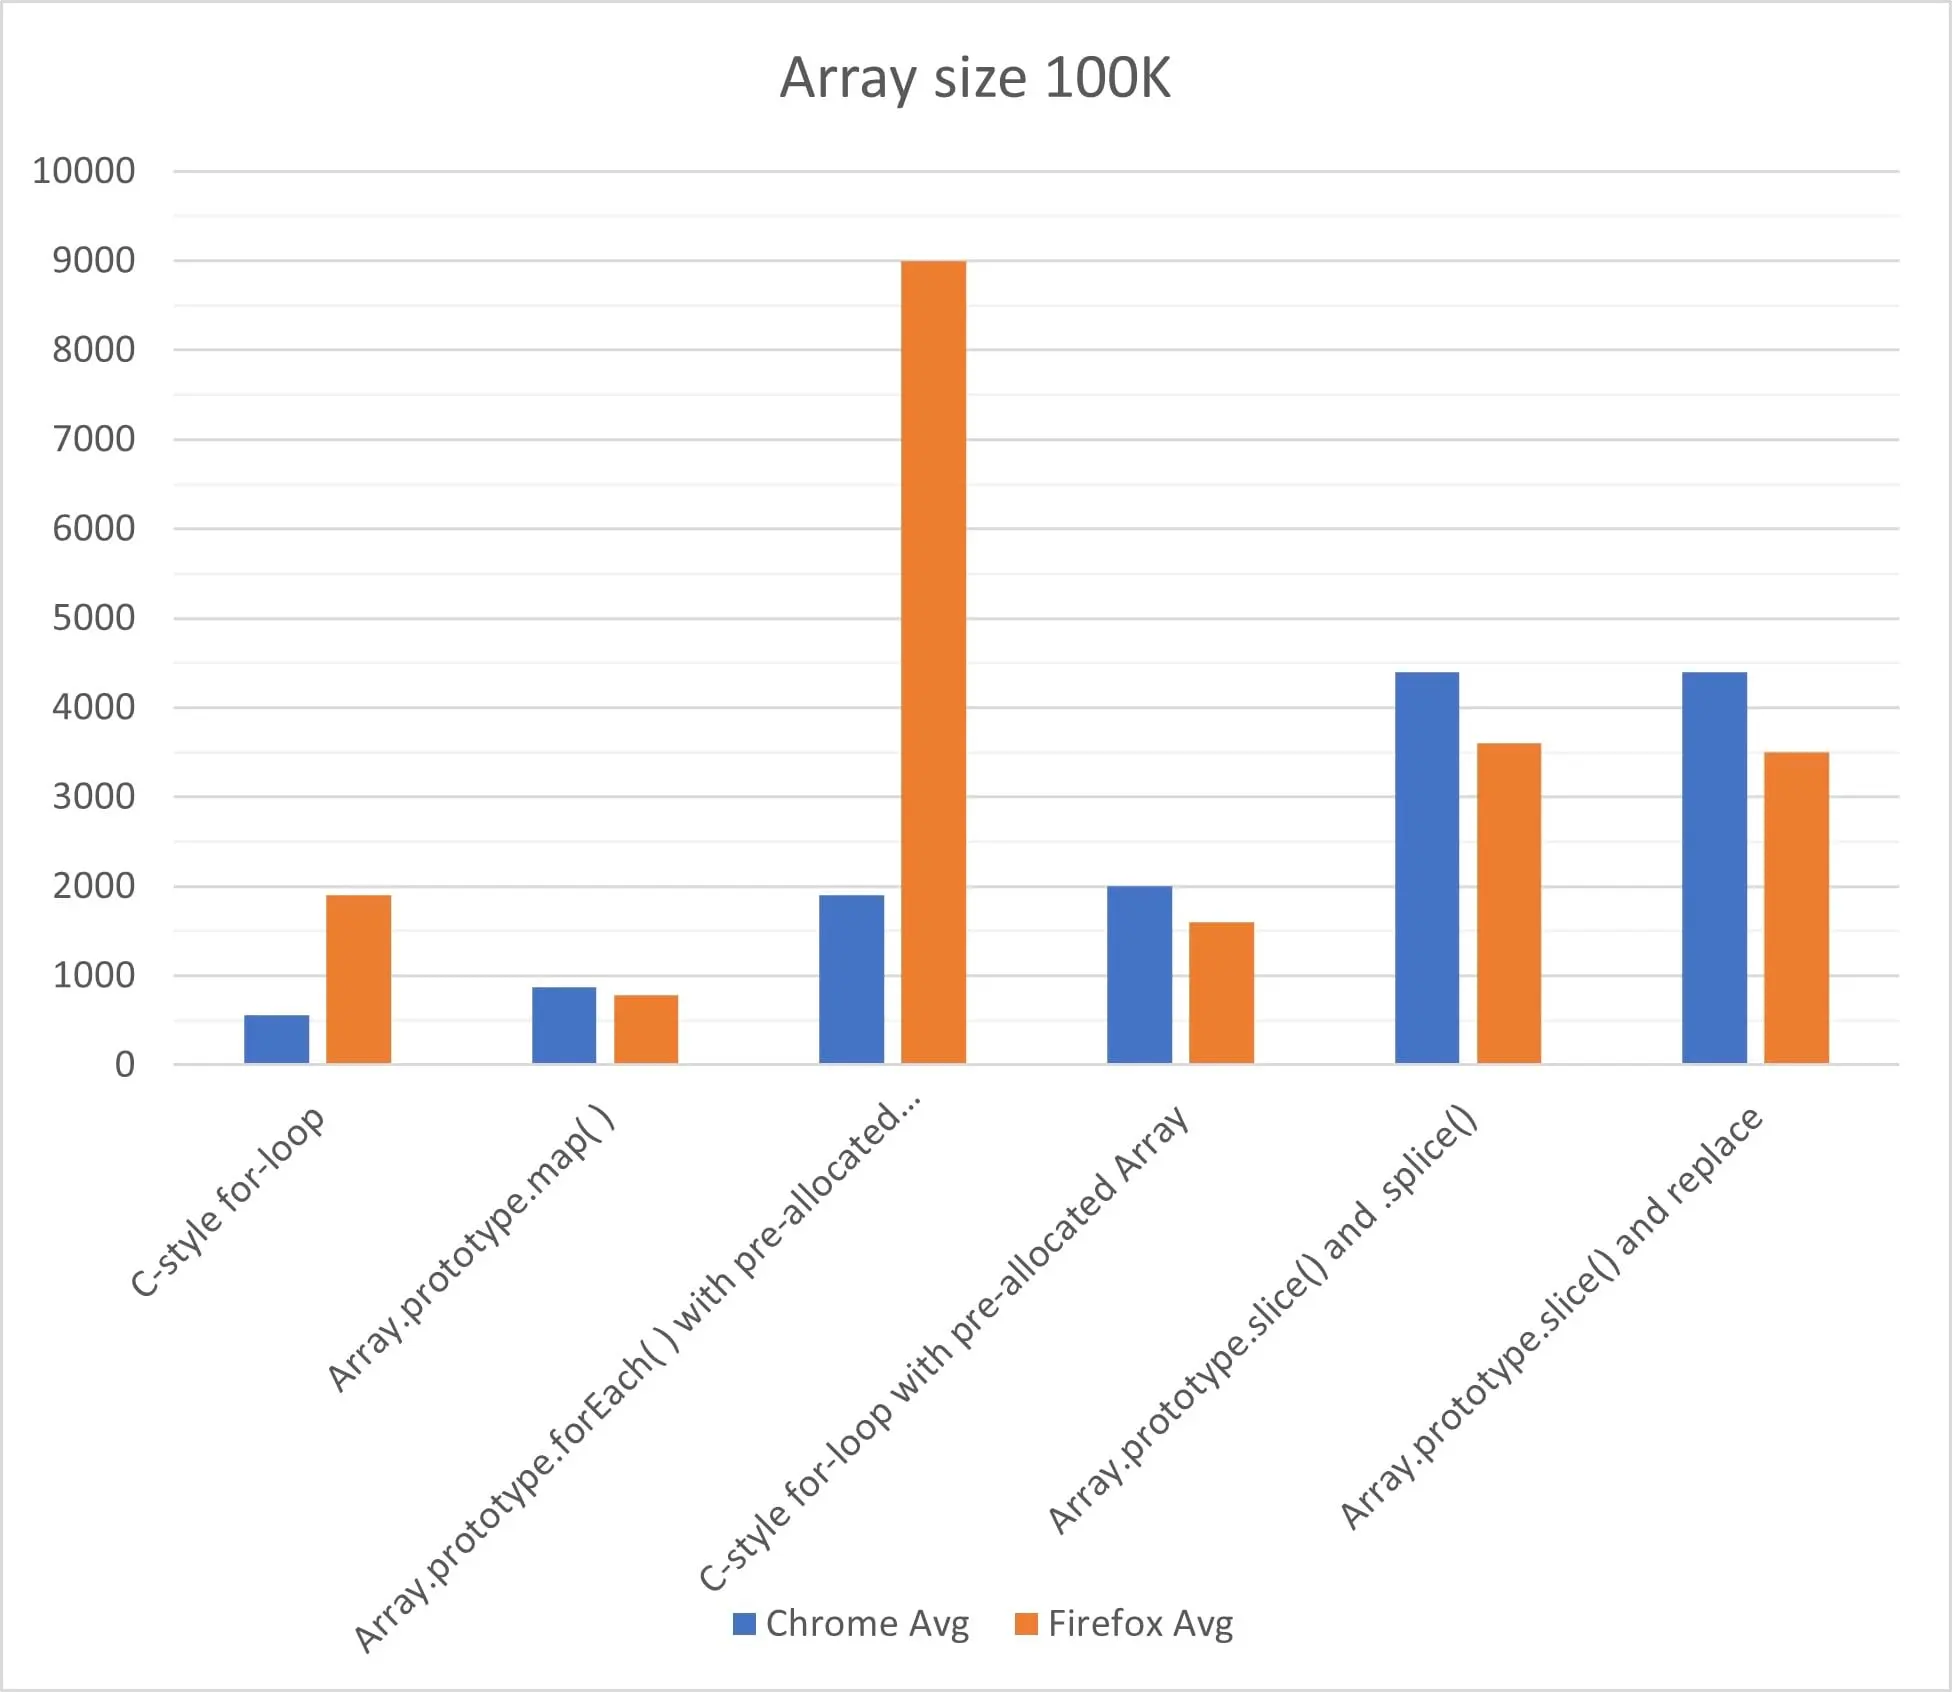 The two browsers compared at array size 100K